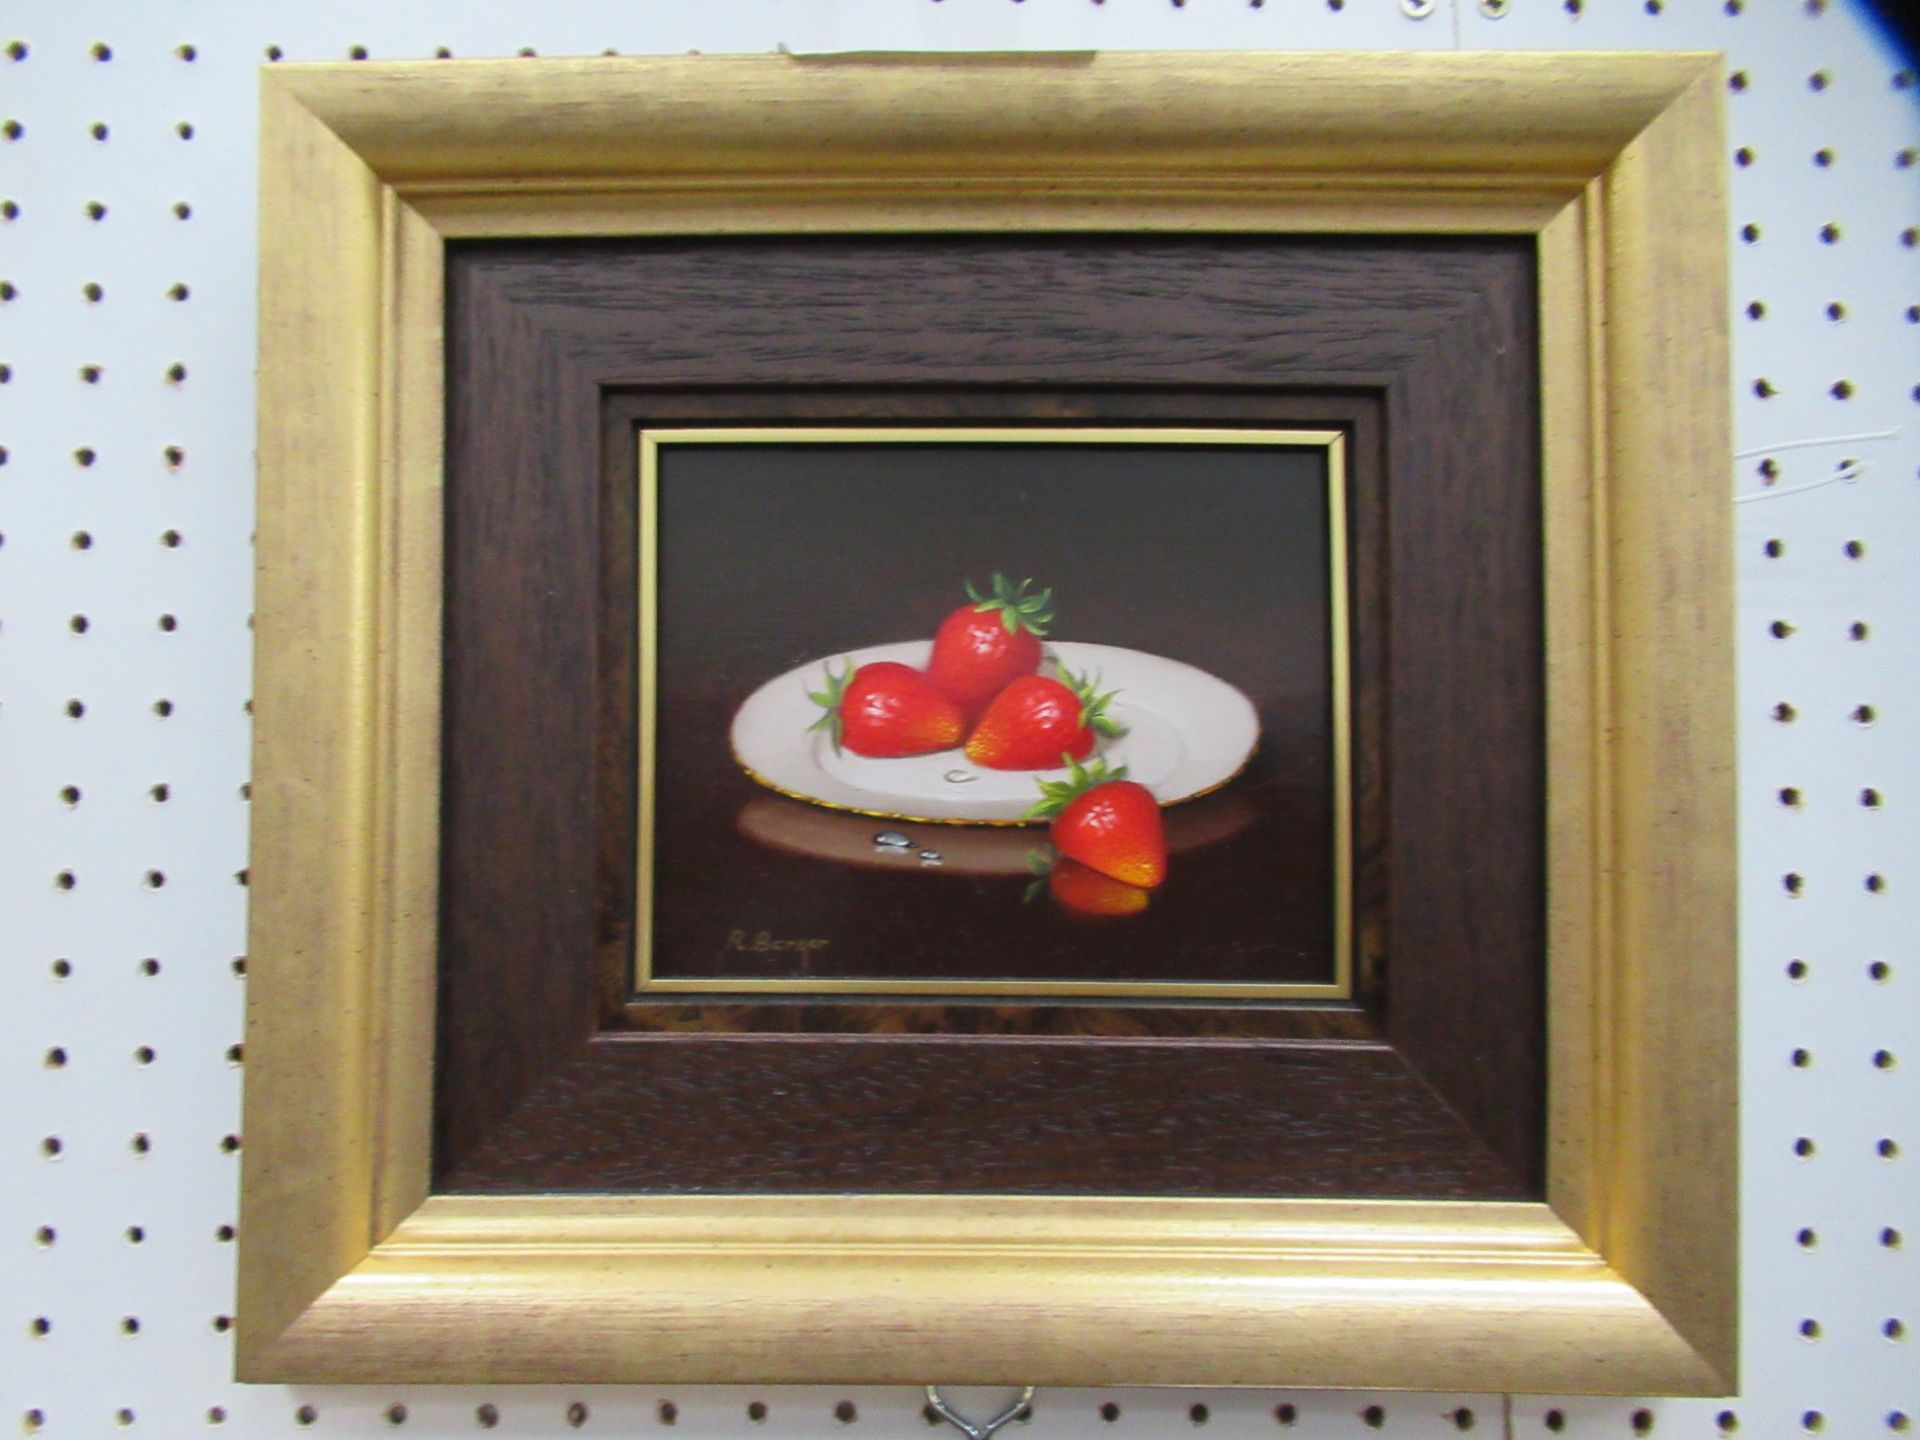 'Strawberries' Oil Painting by Ronald Berger, RRP £595, (12" x 13" including frame) - Image 2 of 2